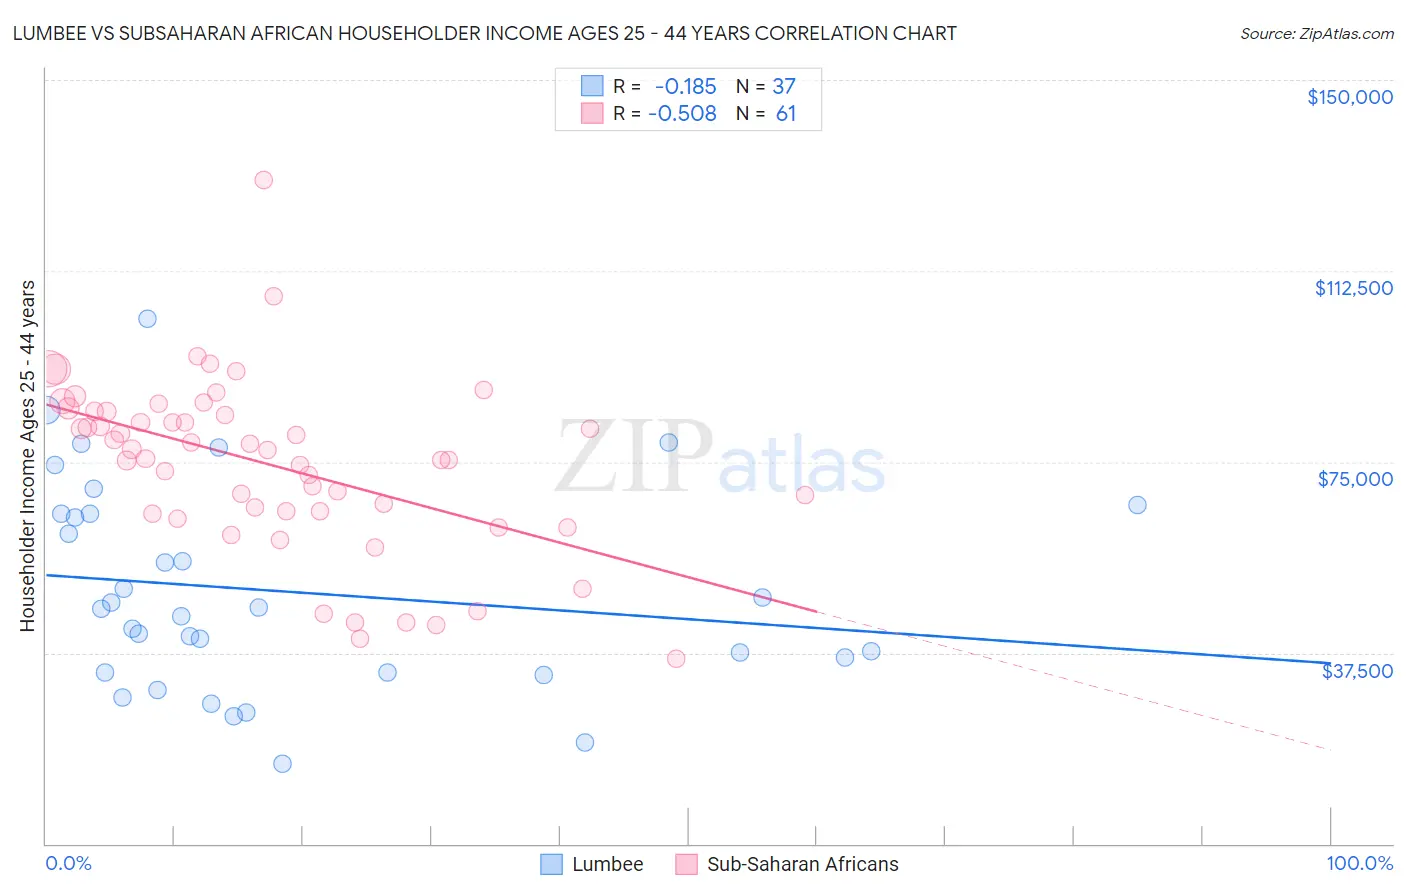 Lumbee vs Subsaharan African Householder Income Ages 25 - 44 years